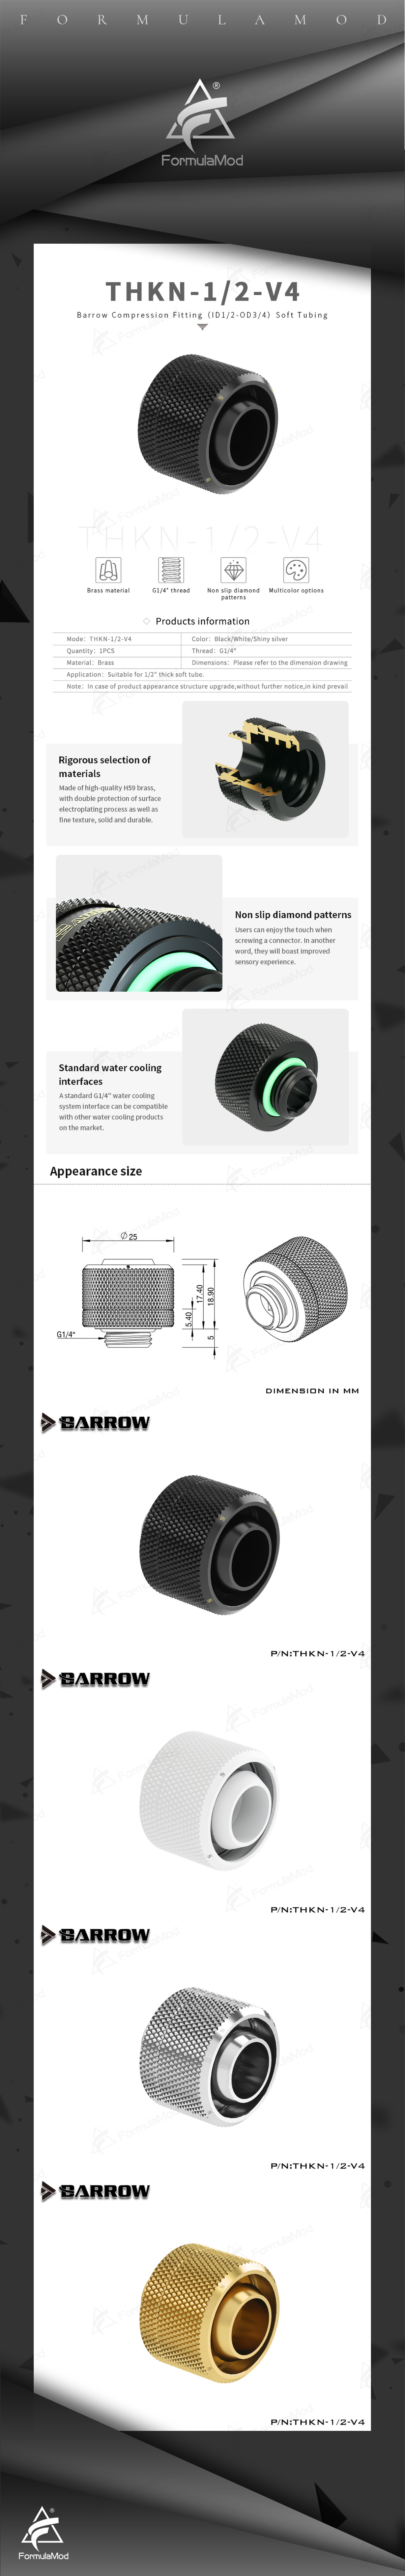 Barrow 13x19mm Soft Tube Fitting, 1/2"ID*3/4"OD G1/4" Compression Connector, Water Cooling Soft Tubing Compression Adapter, THKN-1/2-V4  